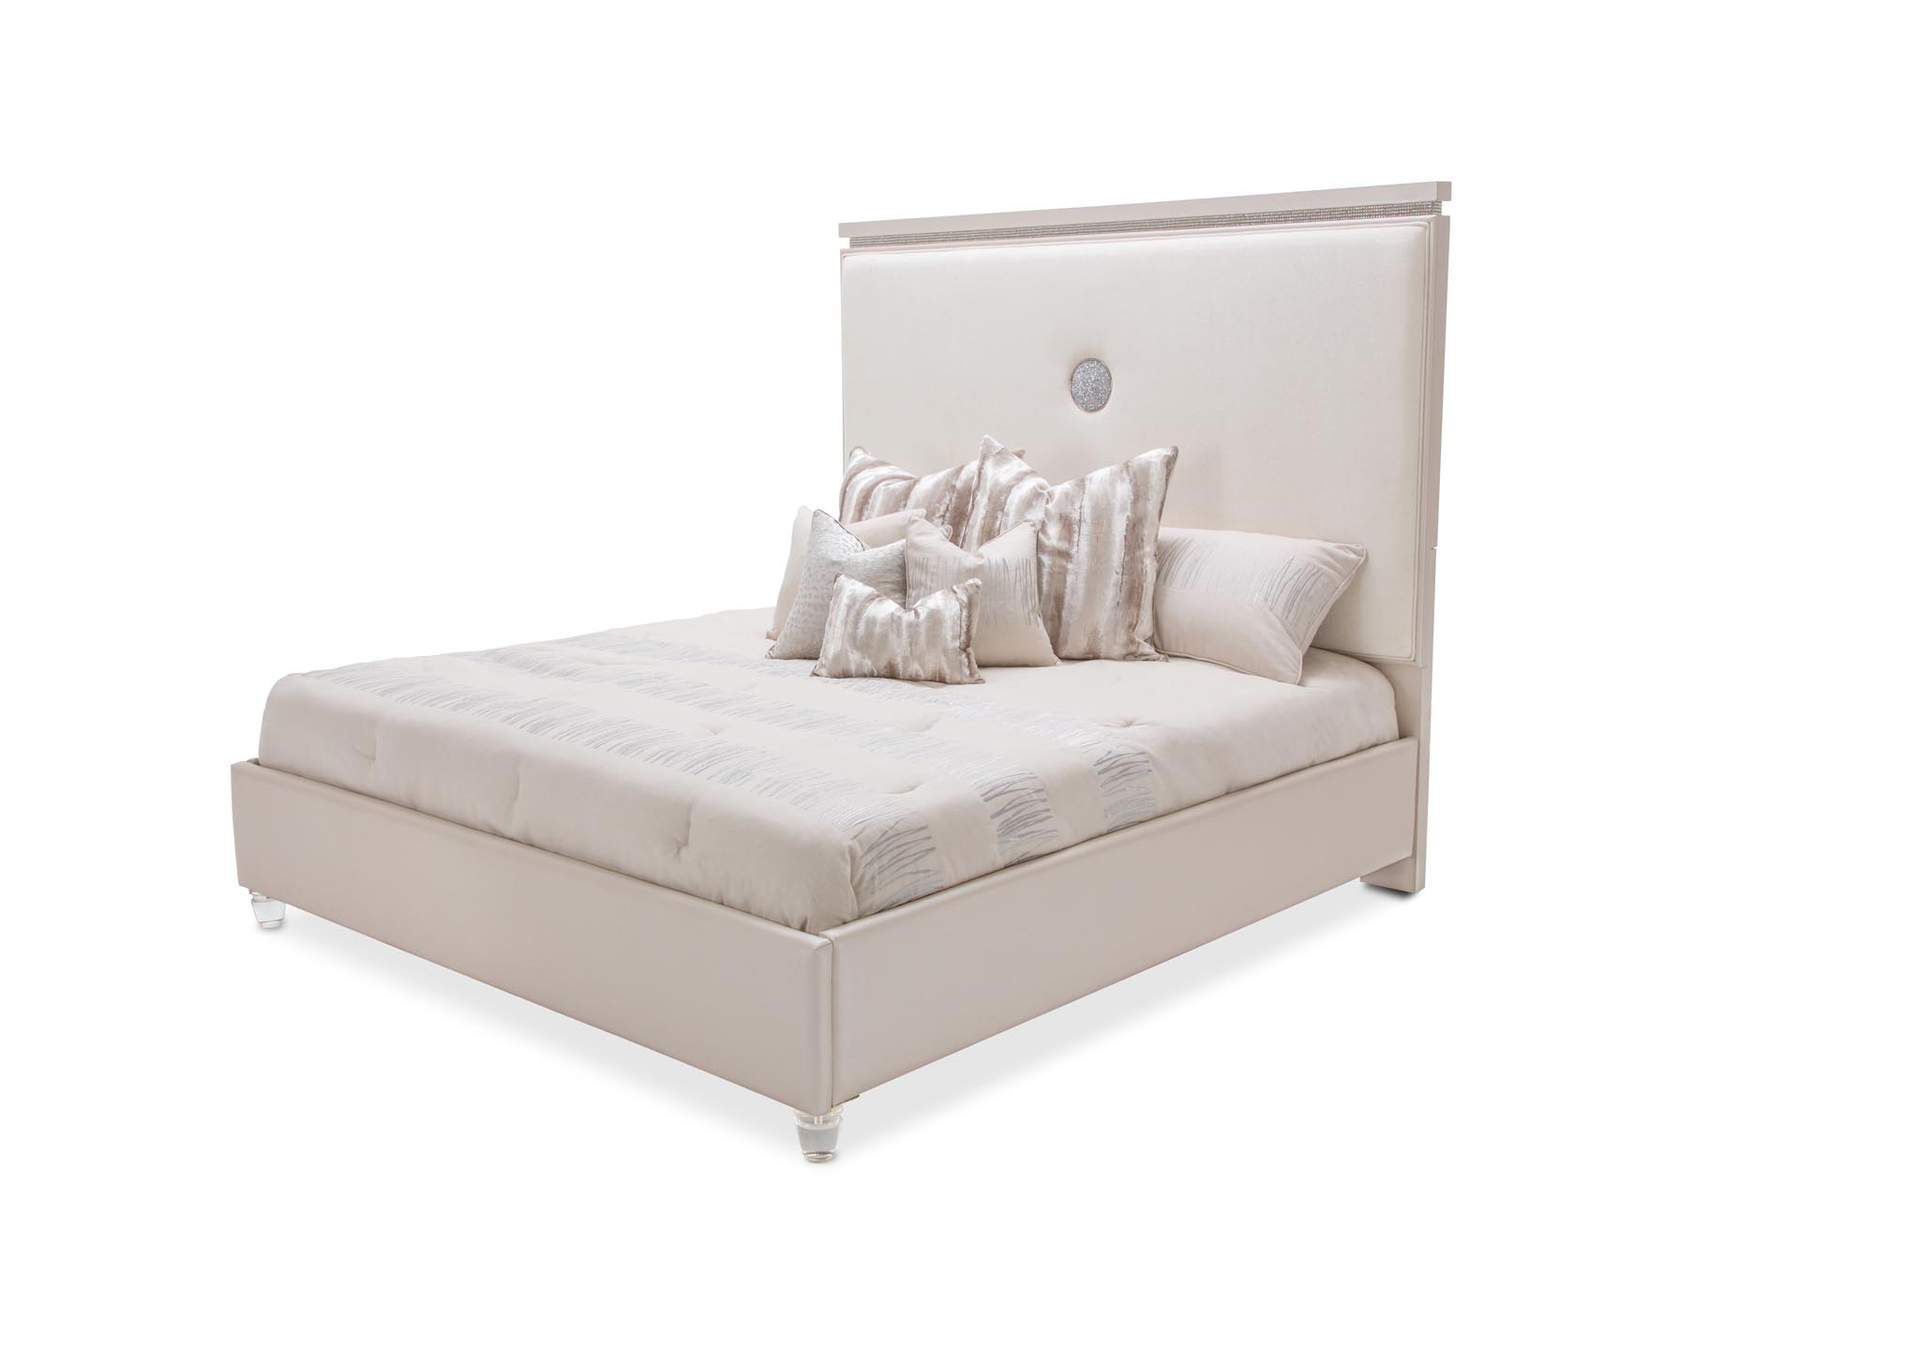 Glimmering Heights"C. King Bed"Ivory,Michael Amini (AICO)